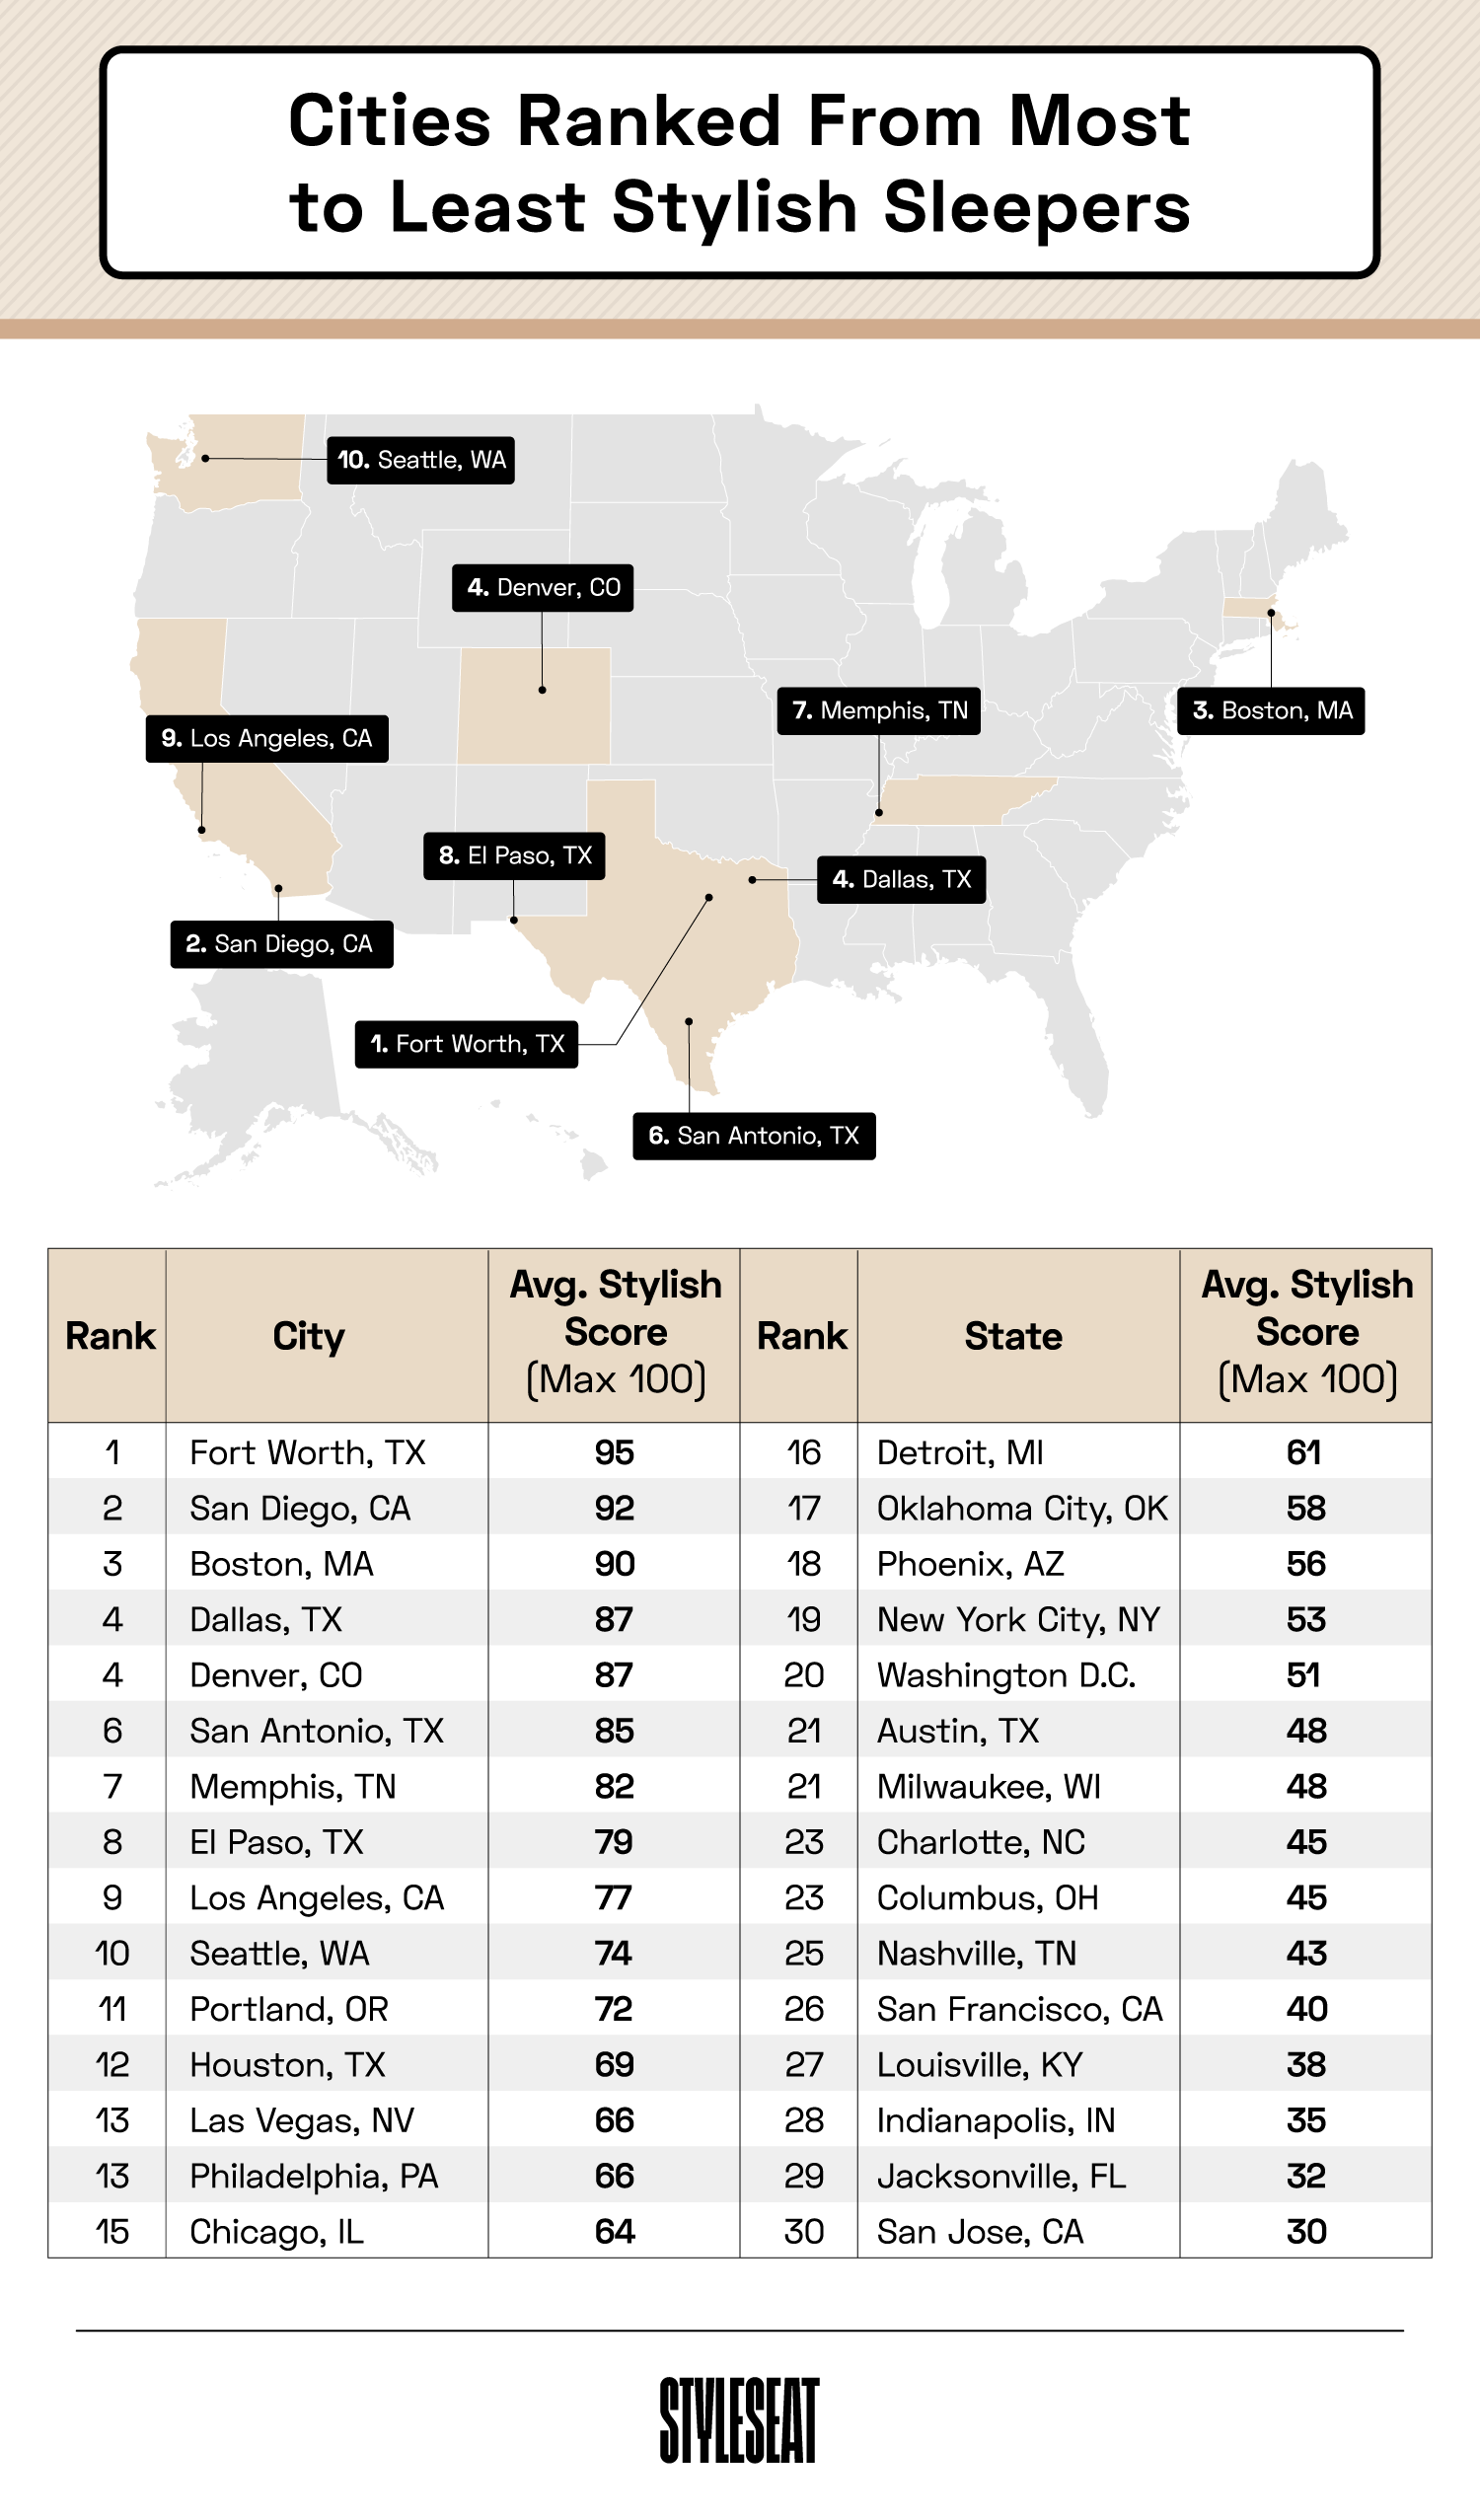 cities with the most stylish sleepers ranked